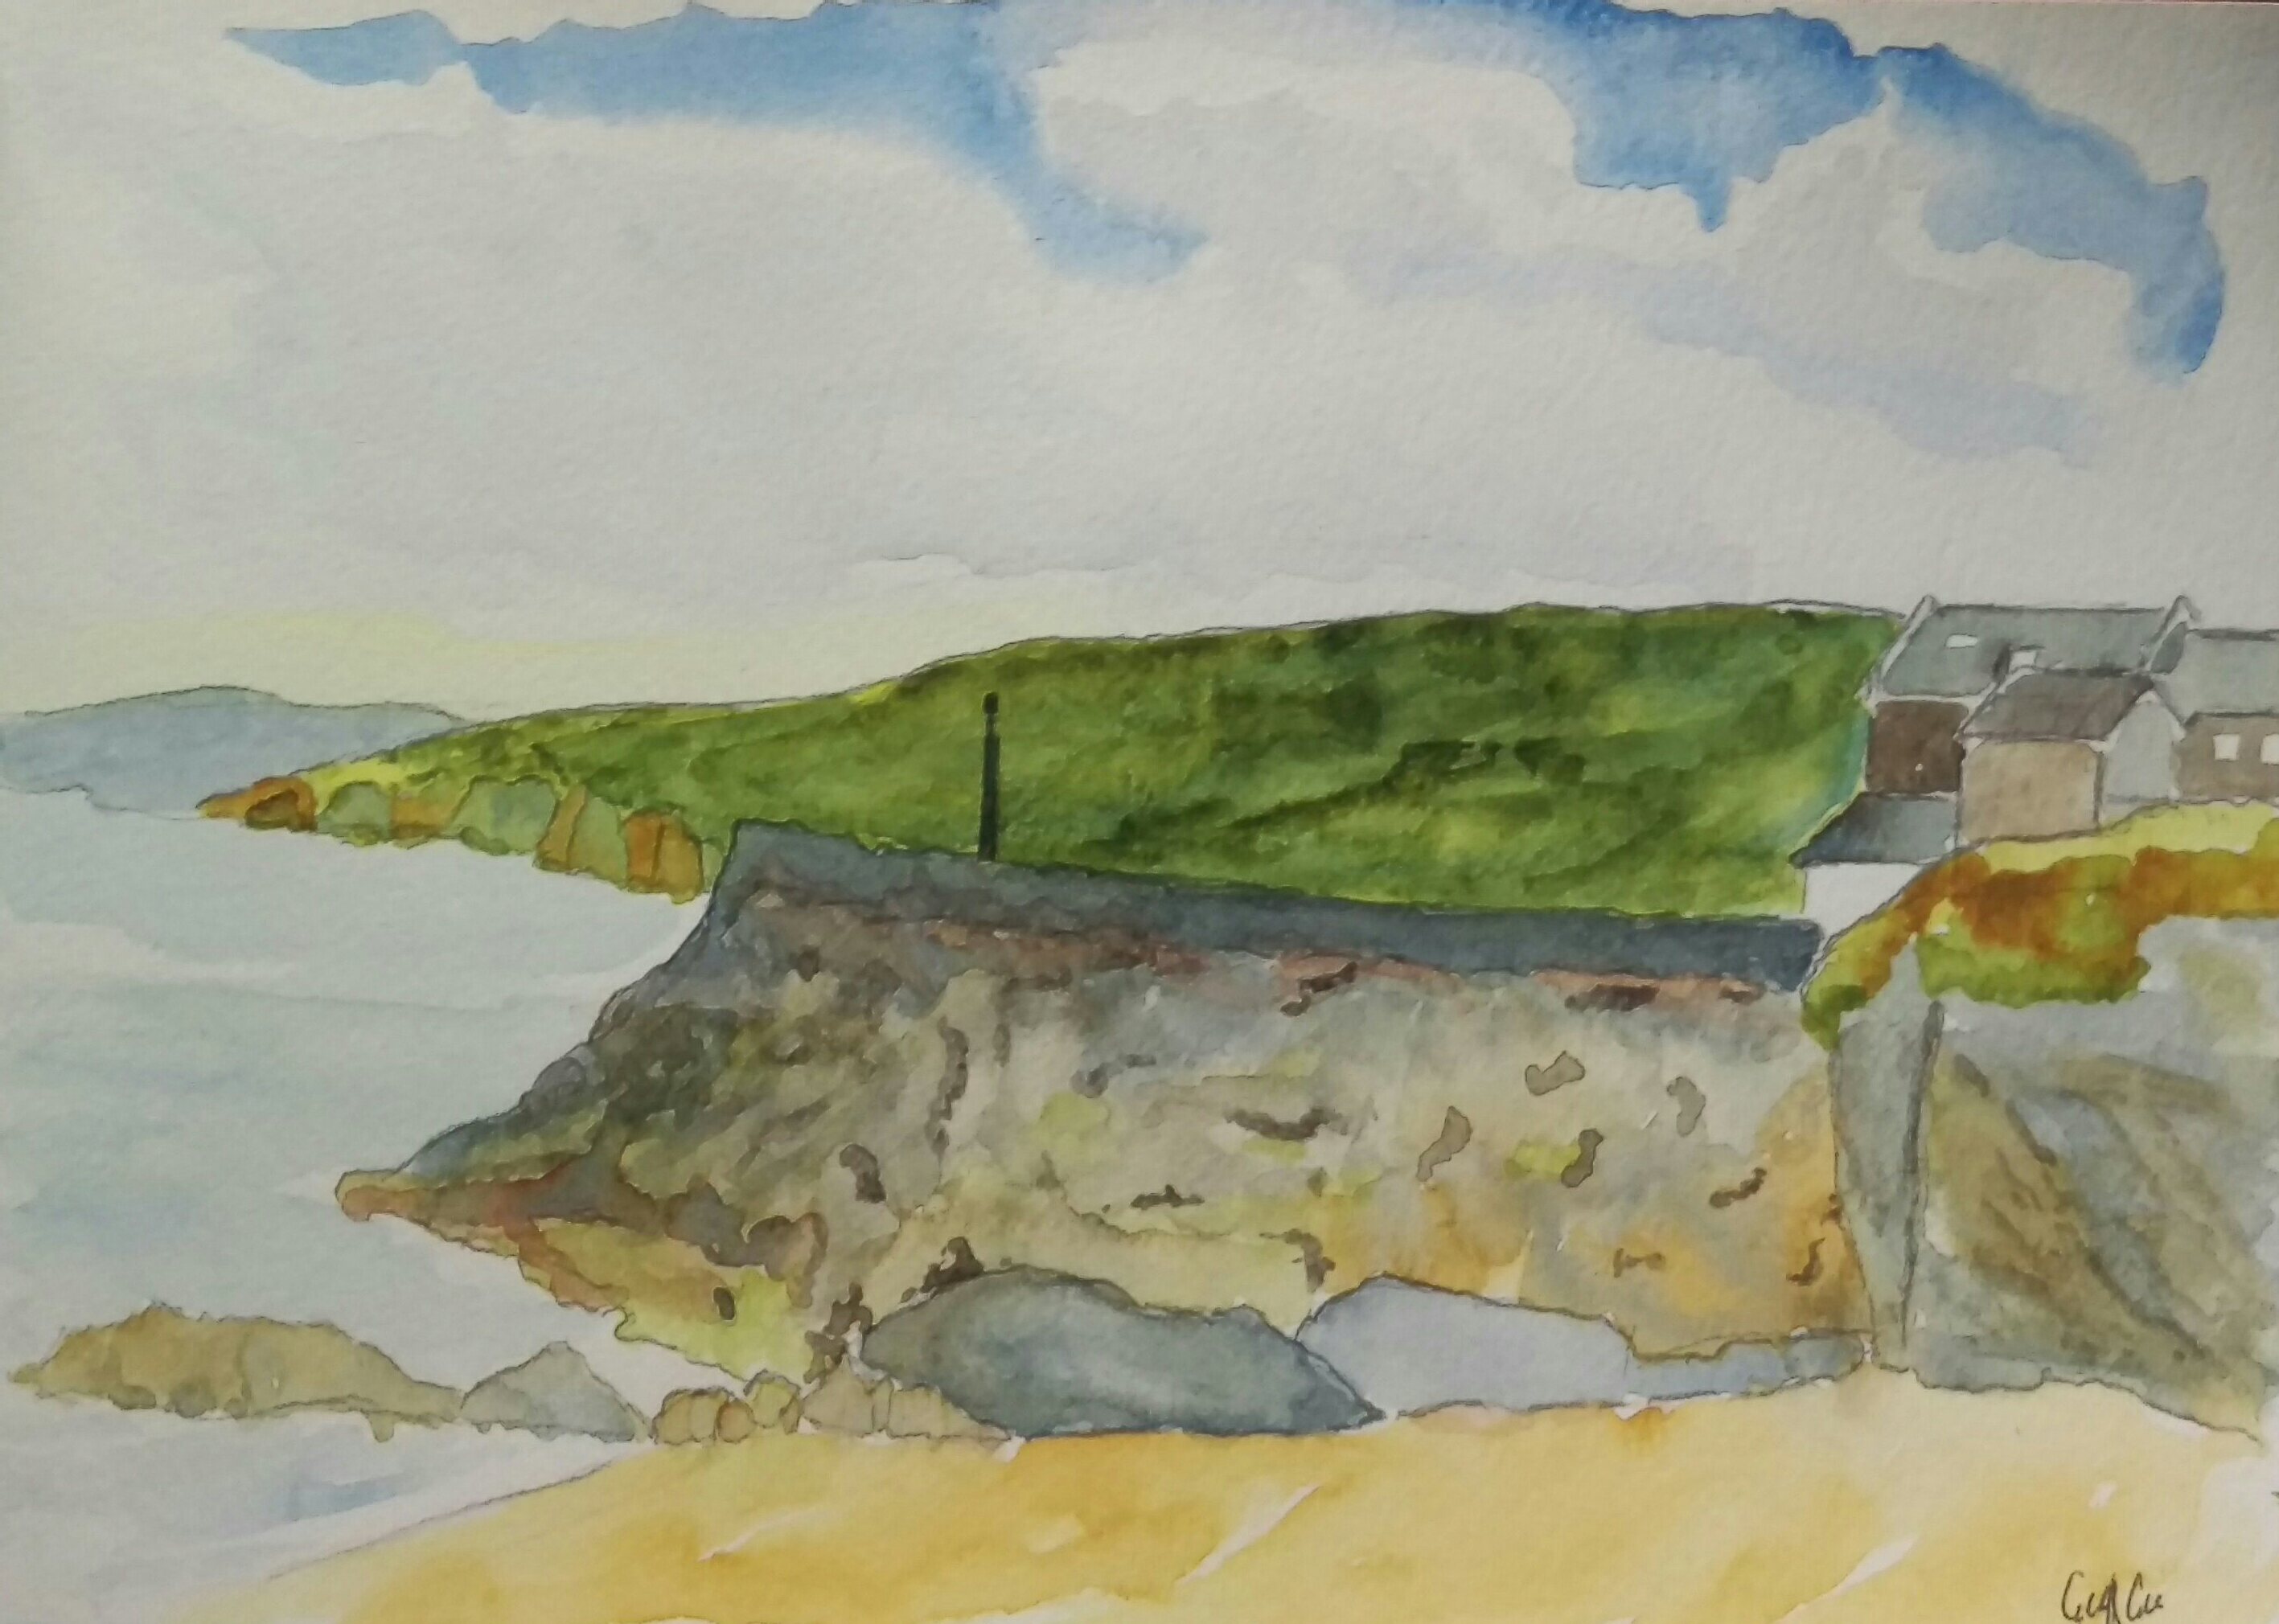 Watercolour  unframed  Picture size - 12"x8"  Price - £20